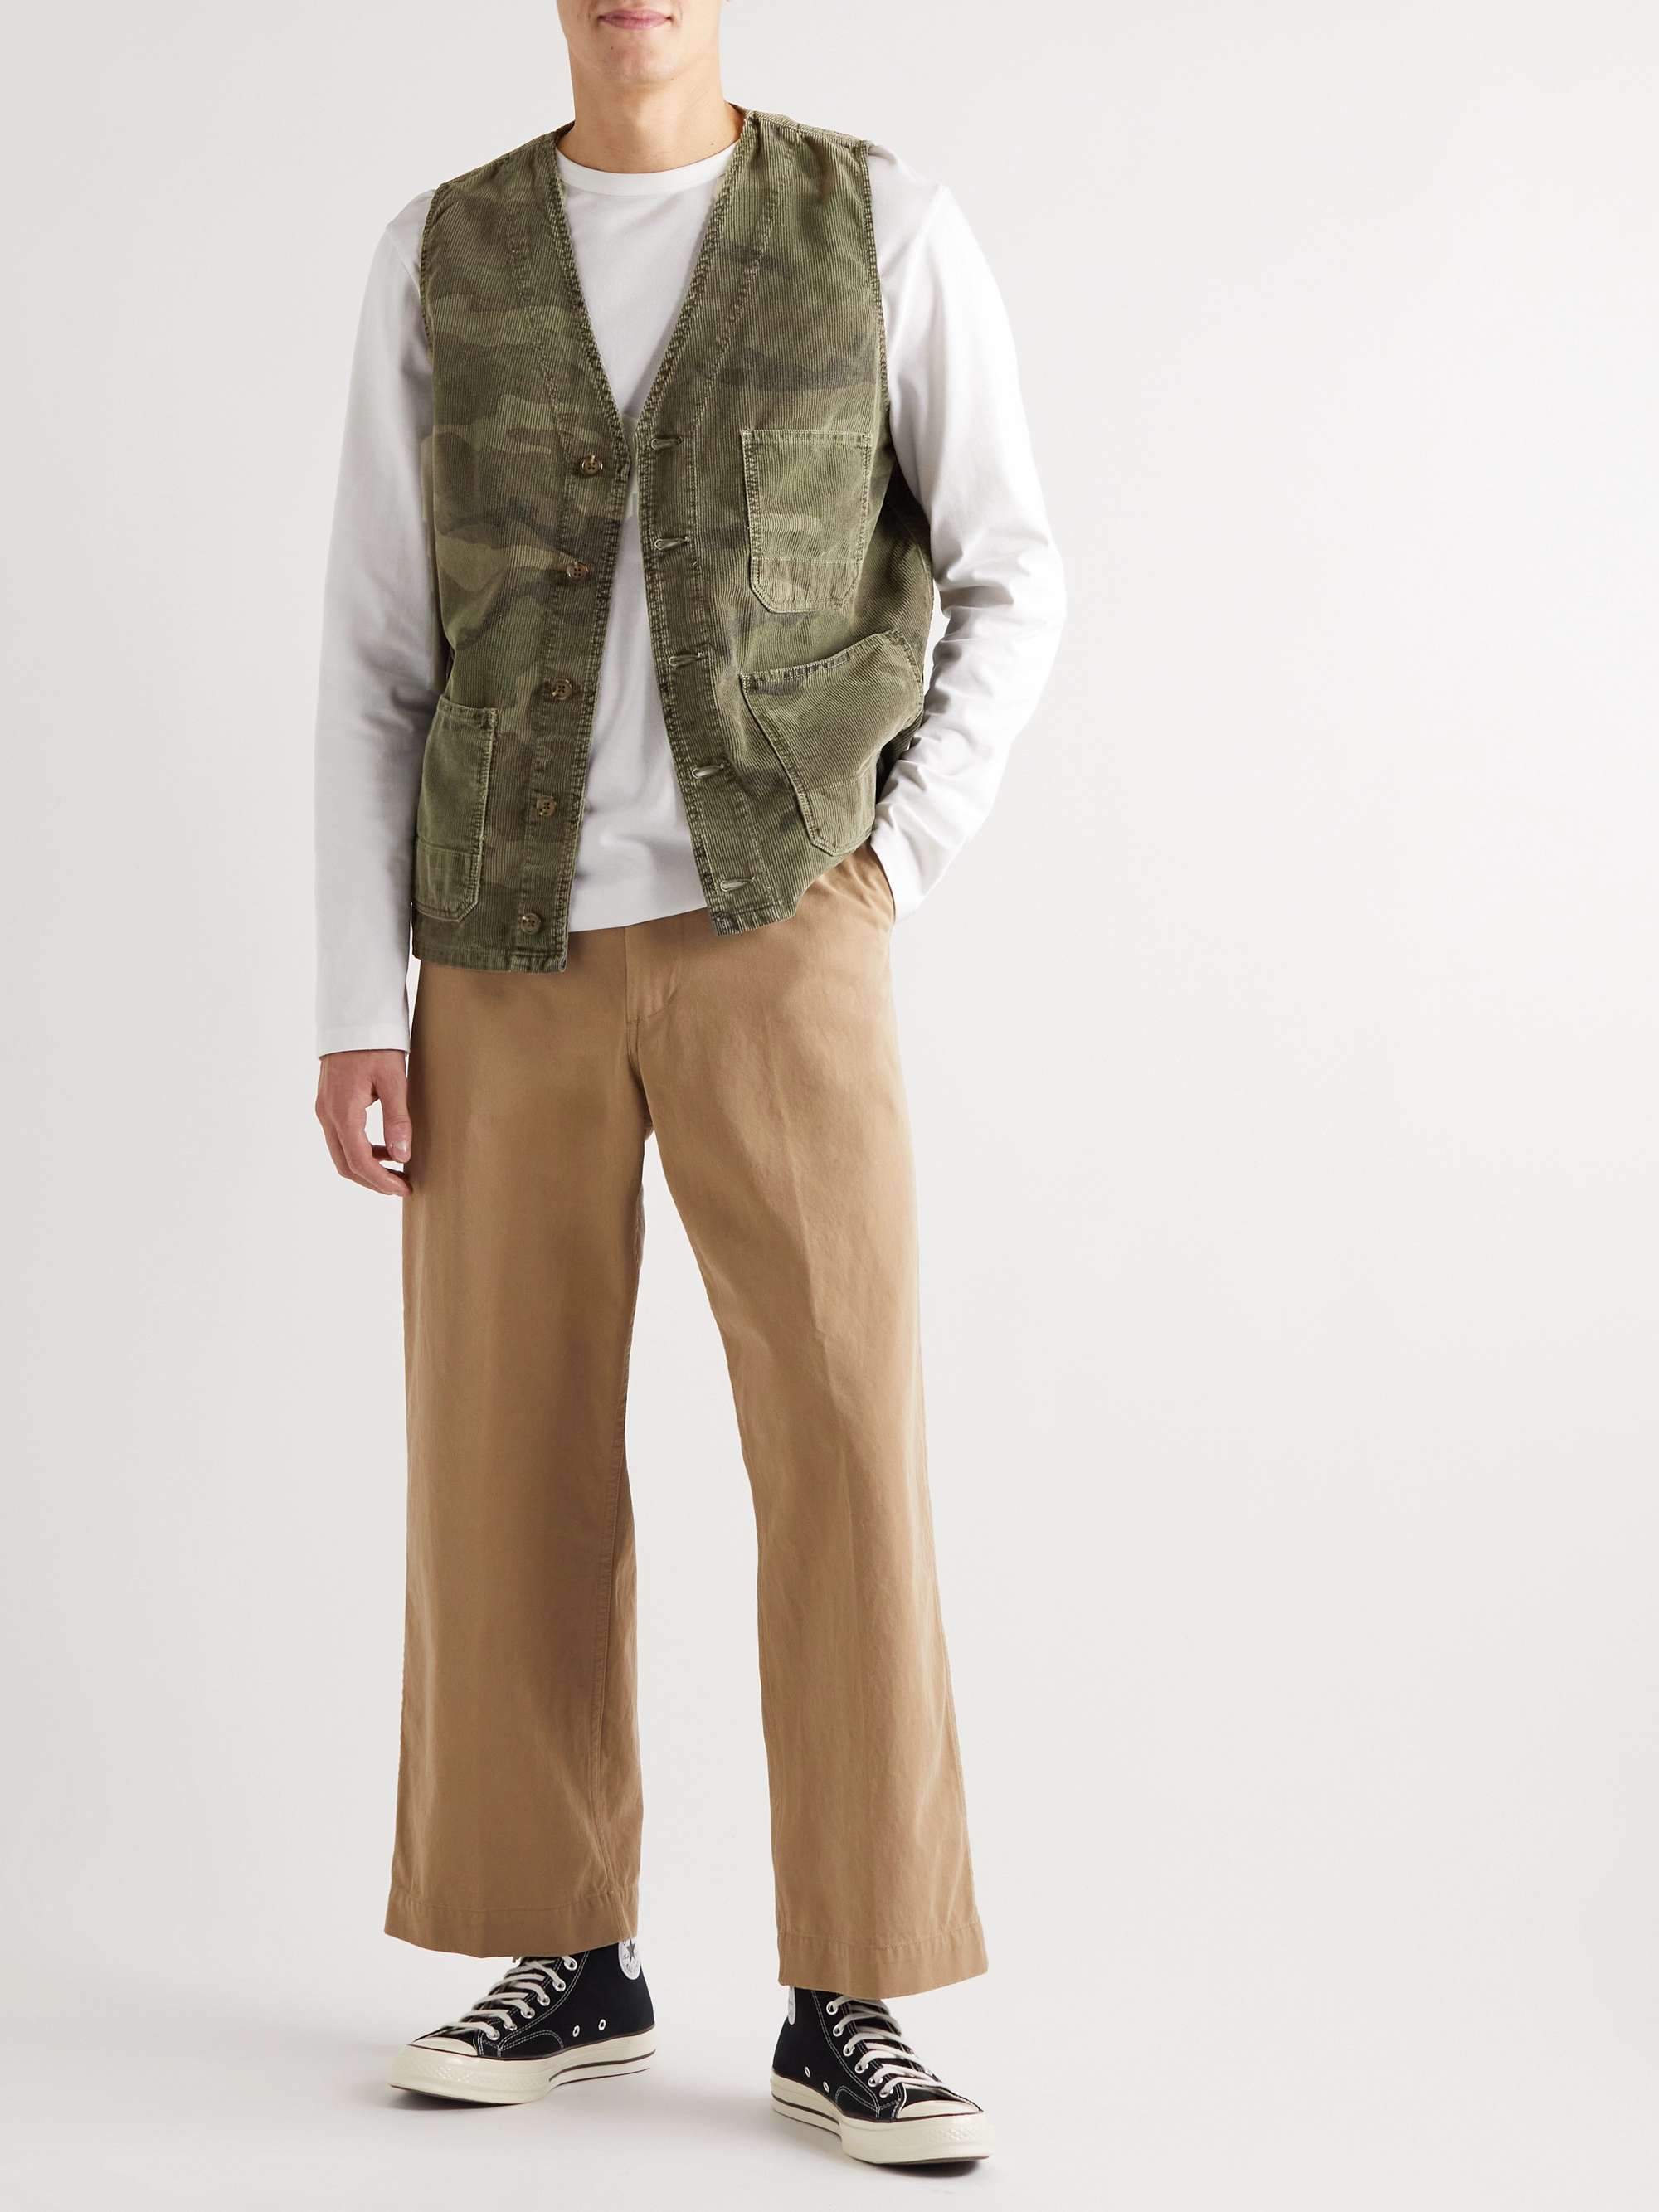 HARTFORD Will Camouflage-Print Garment-Dyed Cotton-Corduroy Gilet for ...